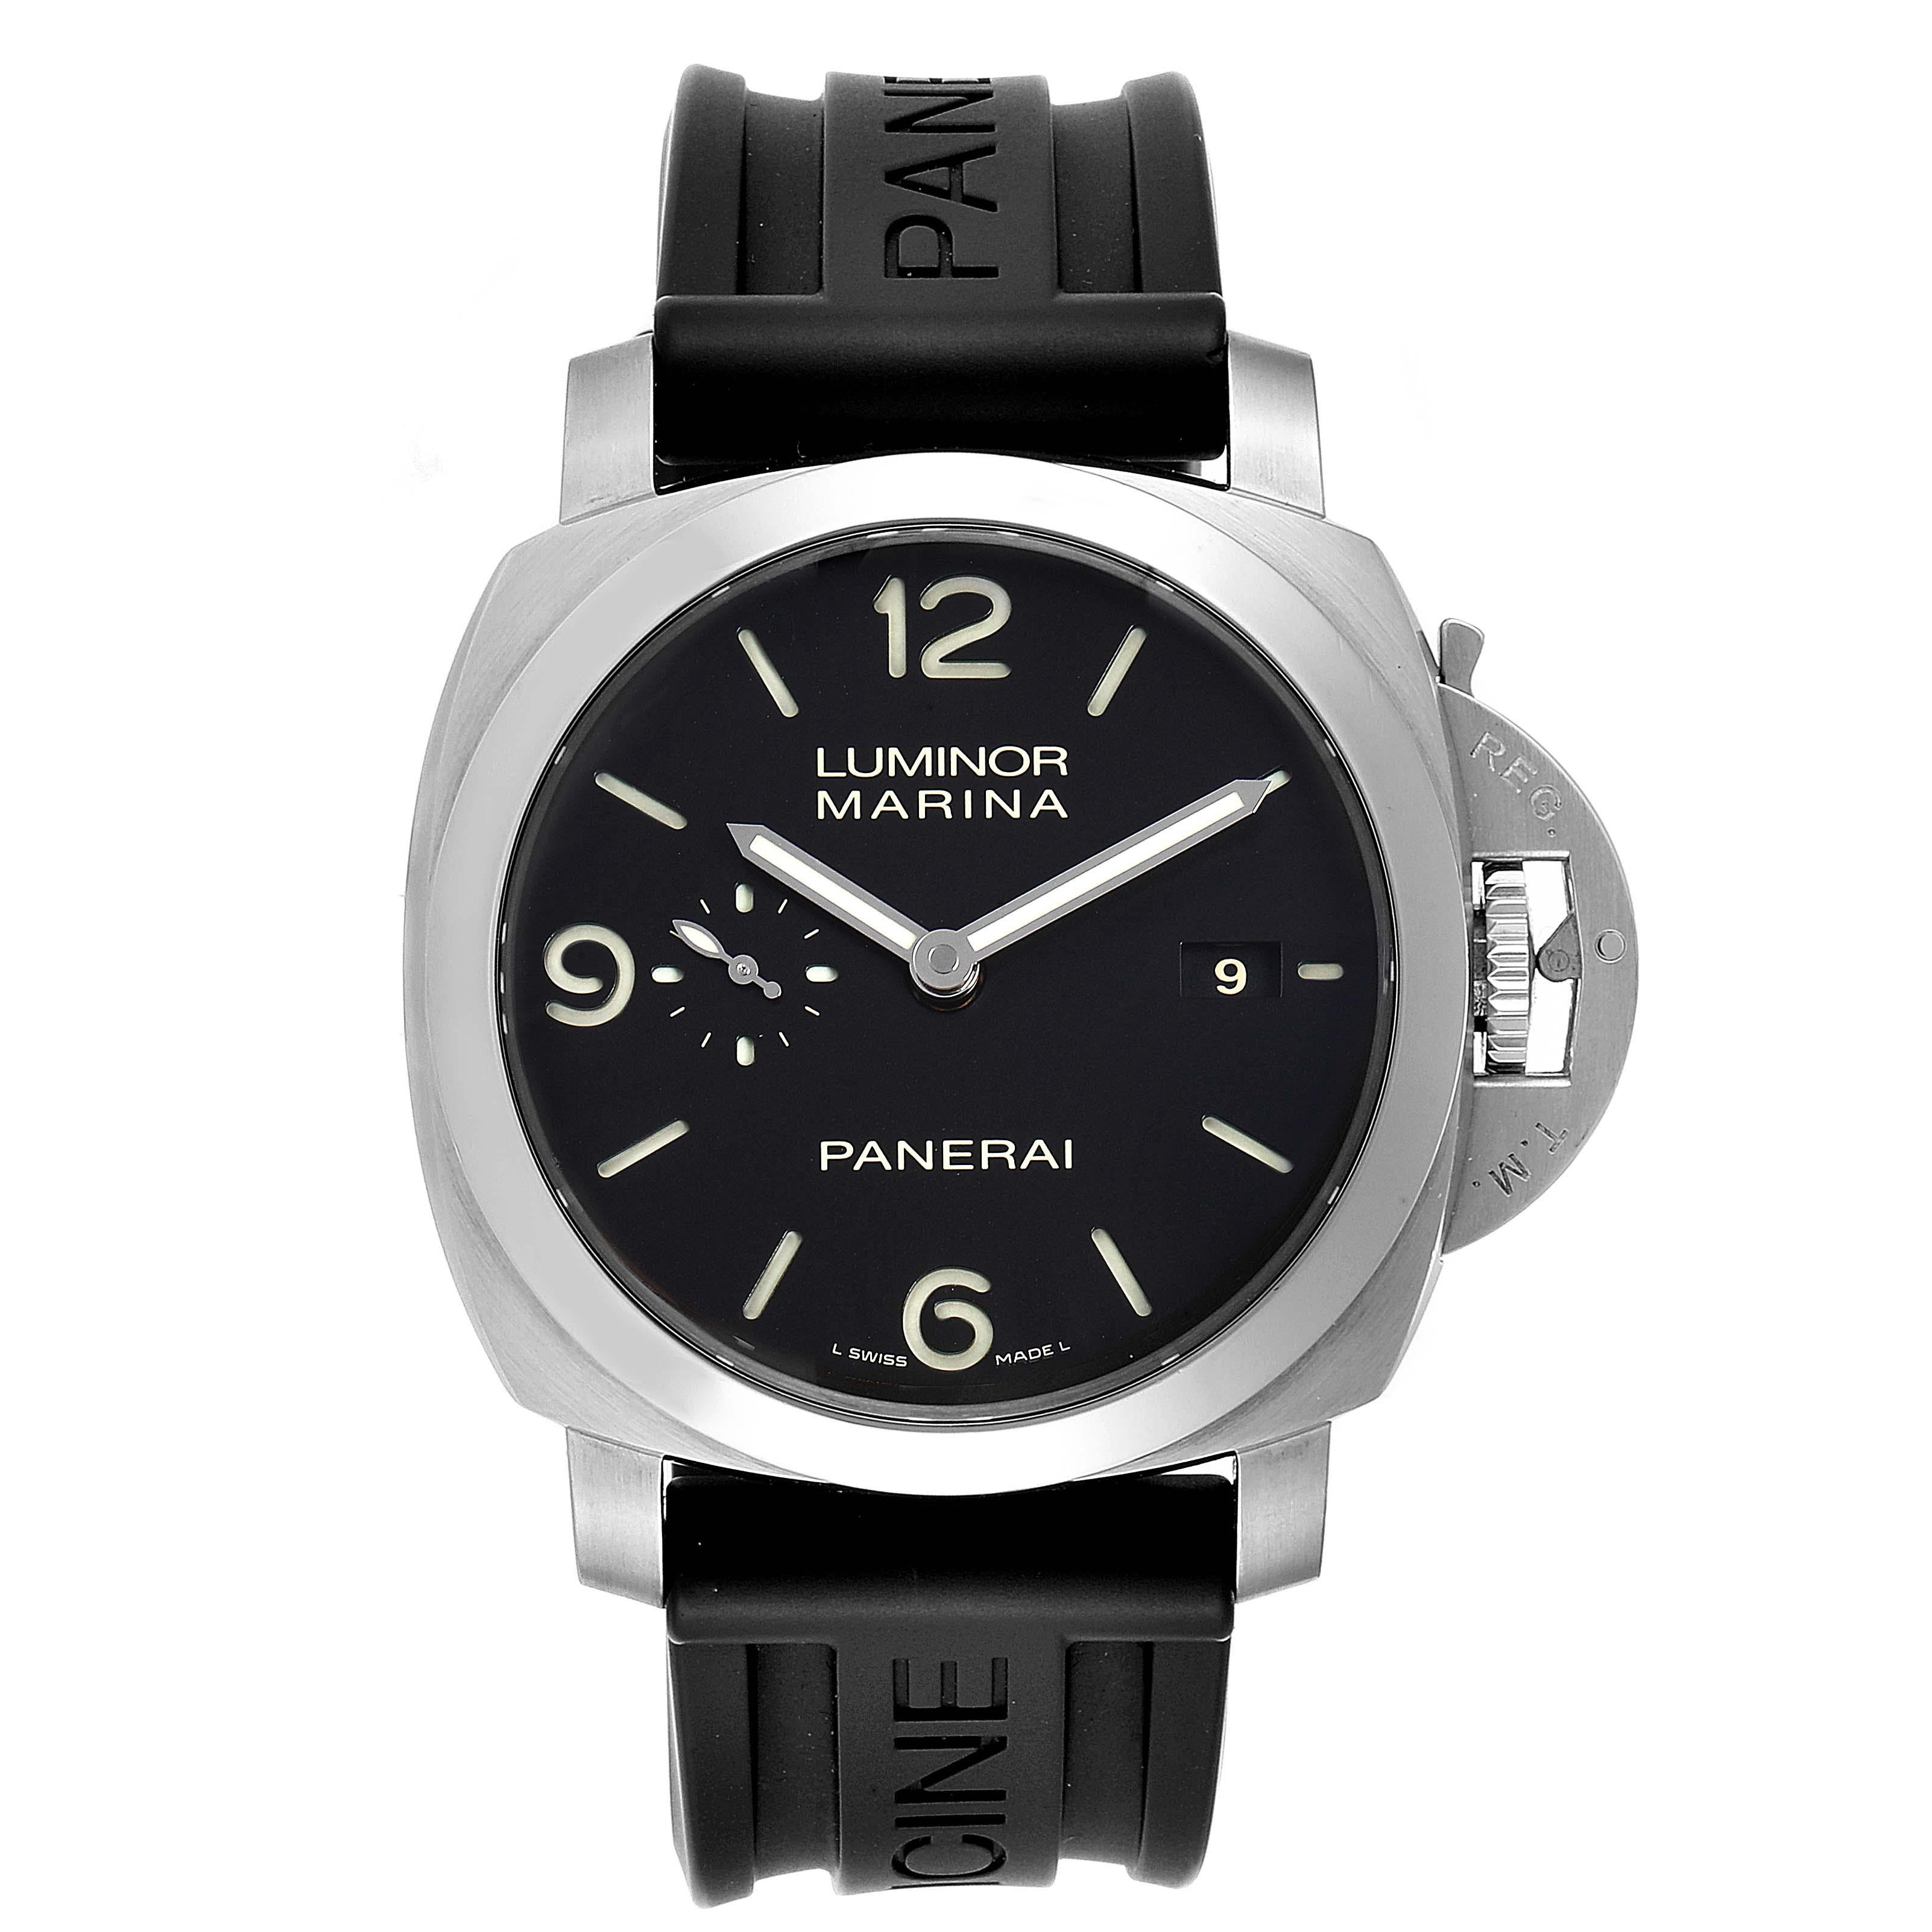 Panerai Luminor 1950 Marina Mens 44mm Watch PAM00312 Box Papers. Automatic self-winding movement. Two part cushion shaped stainless steel case 44.0 mm in diameter. Exhibition case back. Polished Panerai patented crown protector. Polished stainless